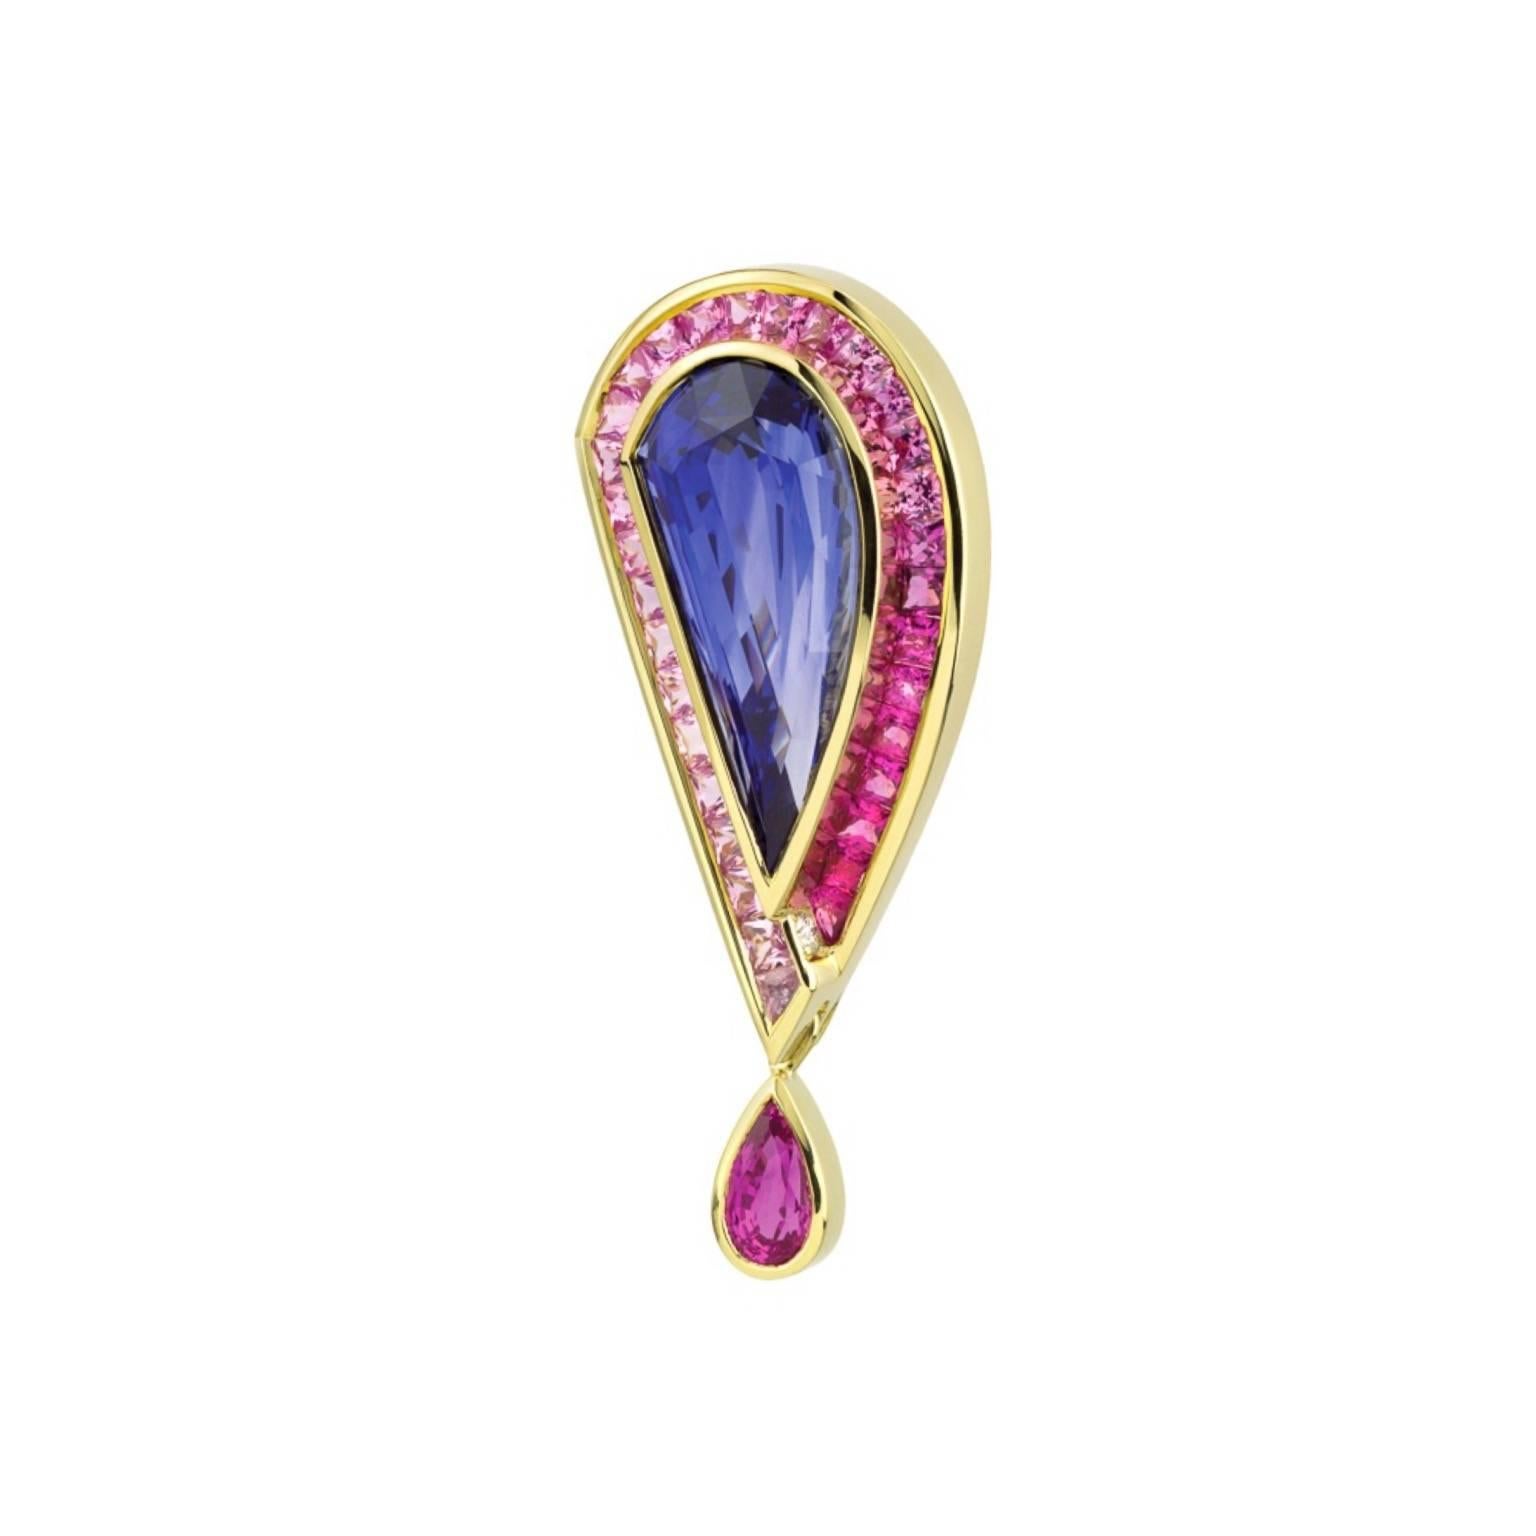 This  one of a kind, Susan Sader brooch/ Pendant features a 17.29 ct. fancy cut, Ceylon Blue Sapphire. With 32 square cut Vietnamese Pink Sapphire for 4.26 ct. tw.  Dolor graduating from light to vivid pink. The dangle at the end of the brooch Is